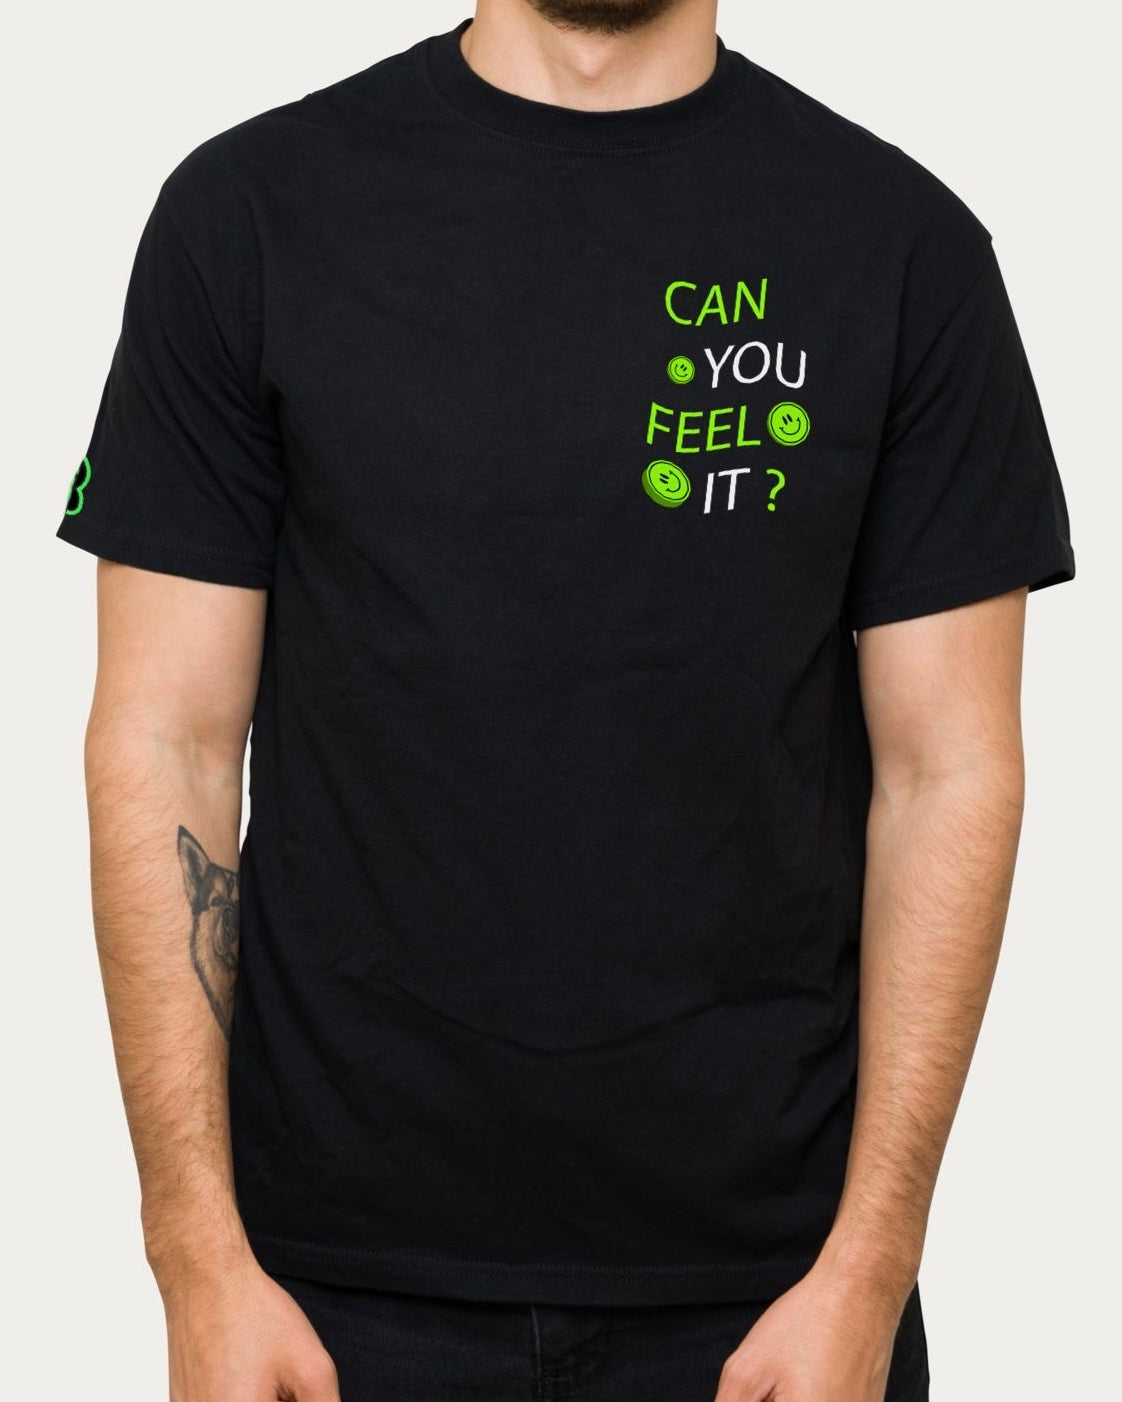 Can You Feel It? T-Shirt